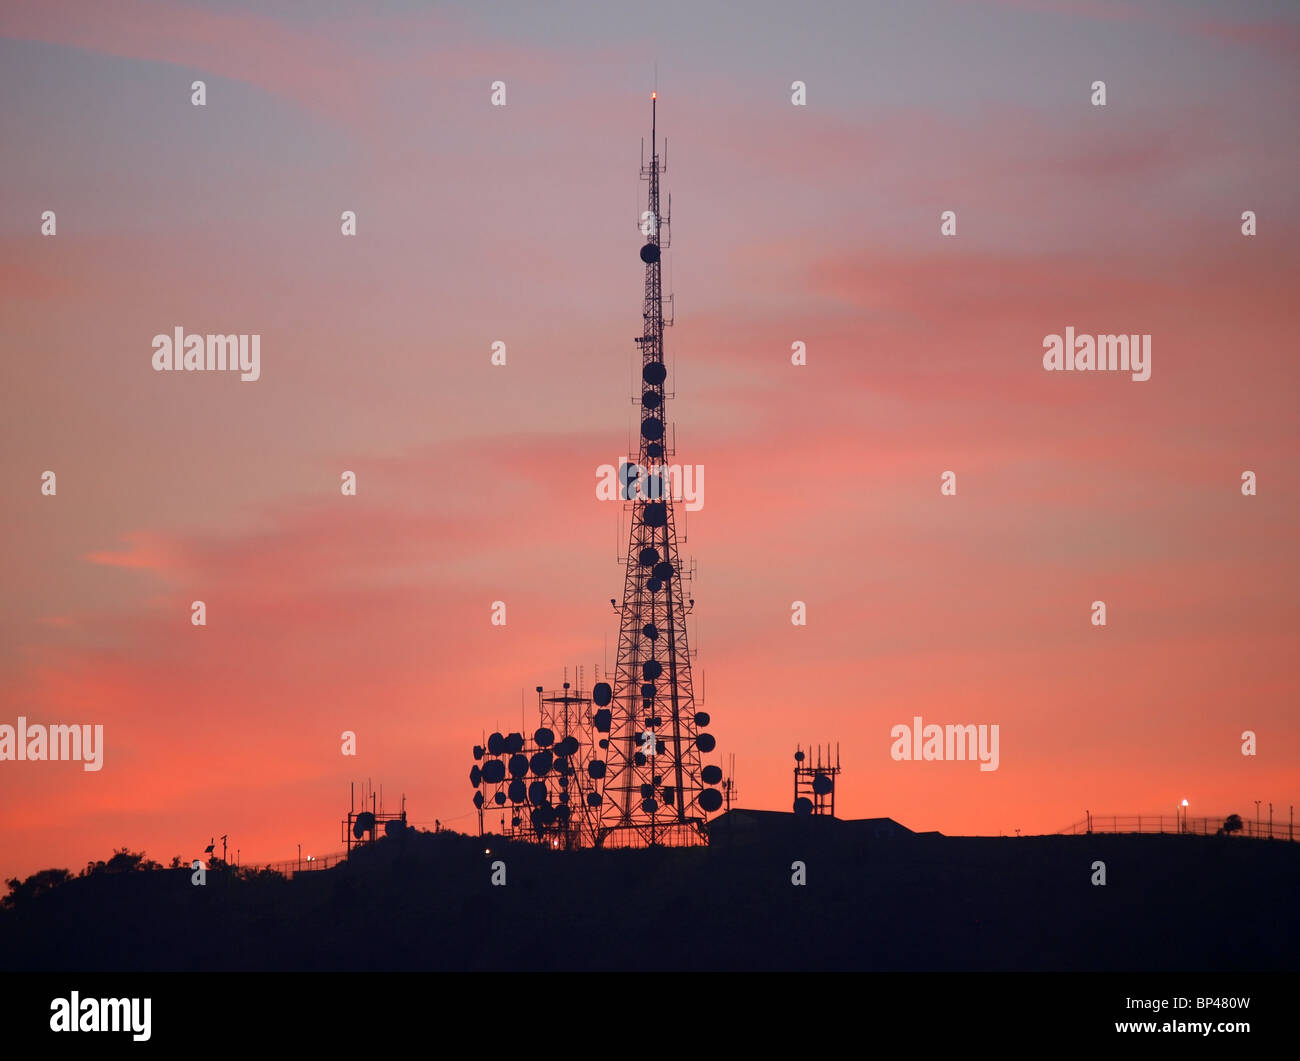 Giant mountain top communication tower with dramatic post sunset sky. Stock Photo